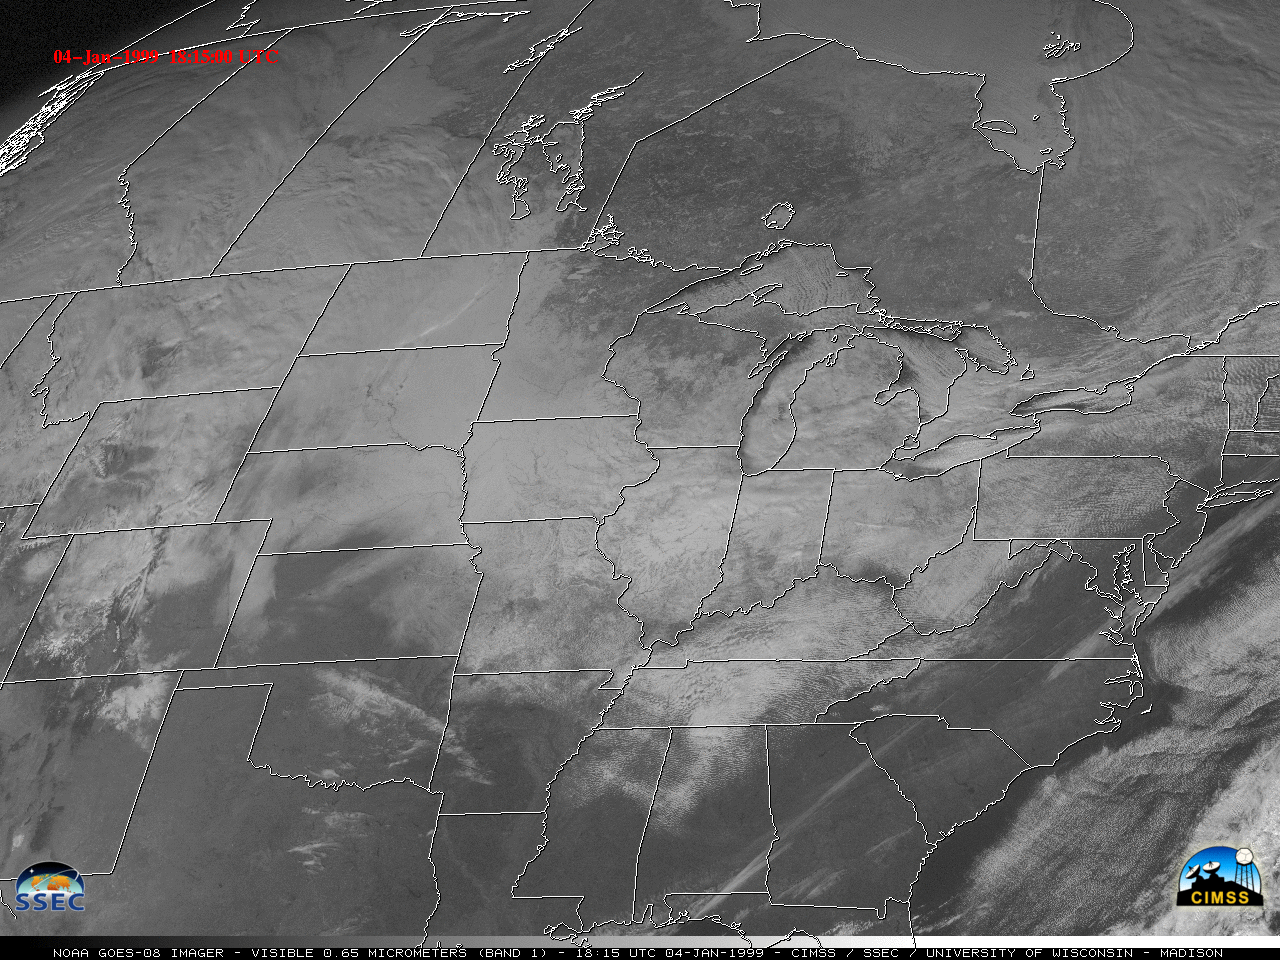 GOES-8 Visible (0.65 µm) images [click to play MP4 animation]